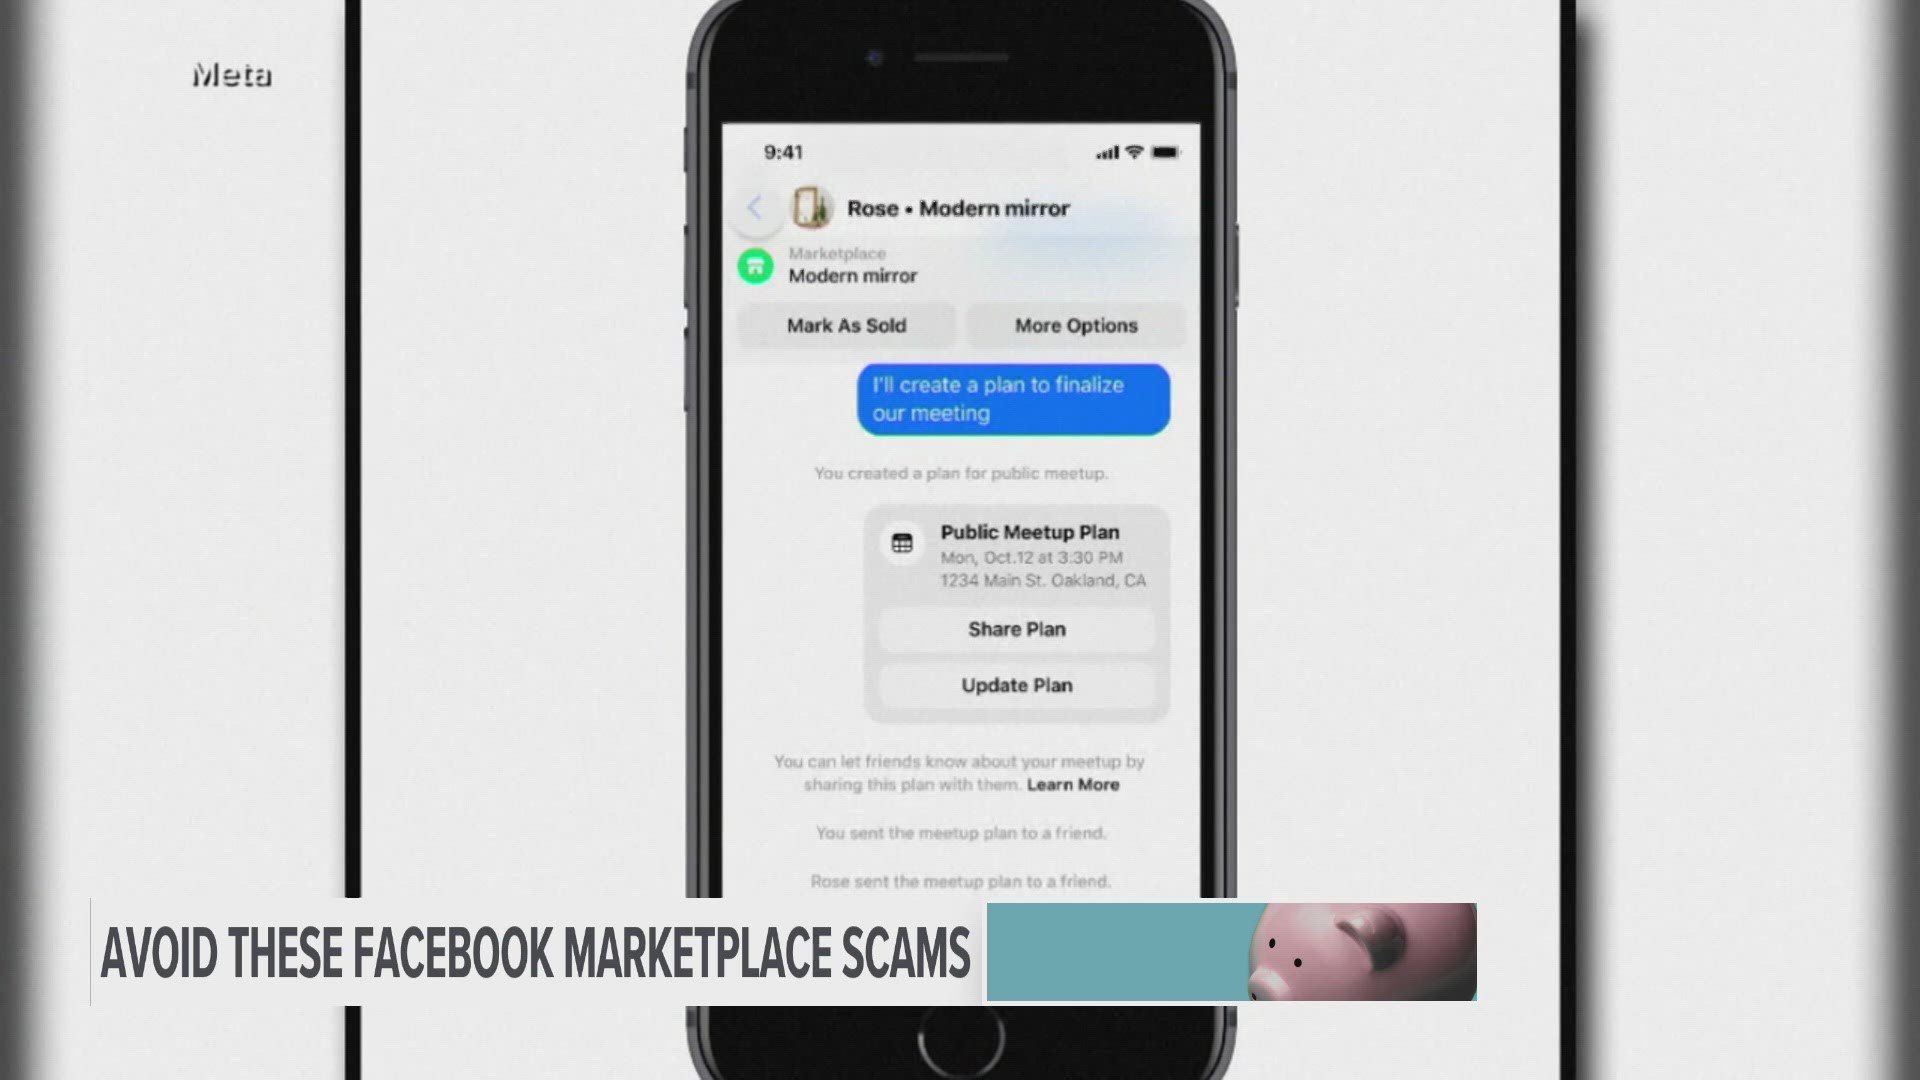 Facebook Marketplace is a platform to save some cash by finding a good deal or earn some cash by getting rid of items, but look out for scams.